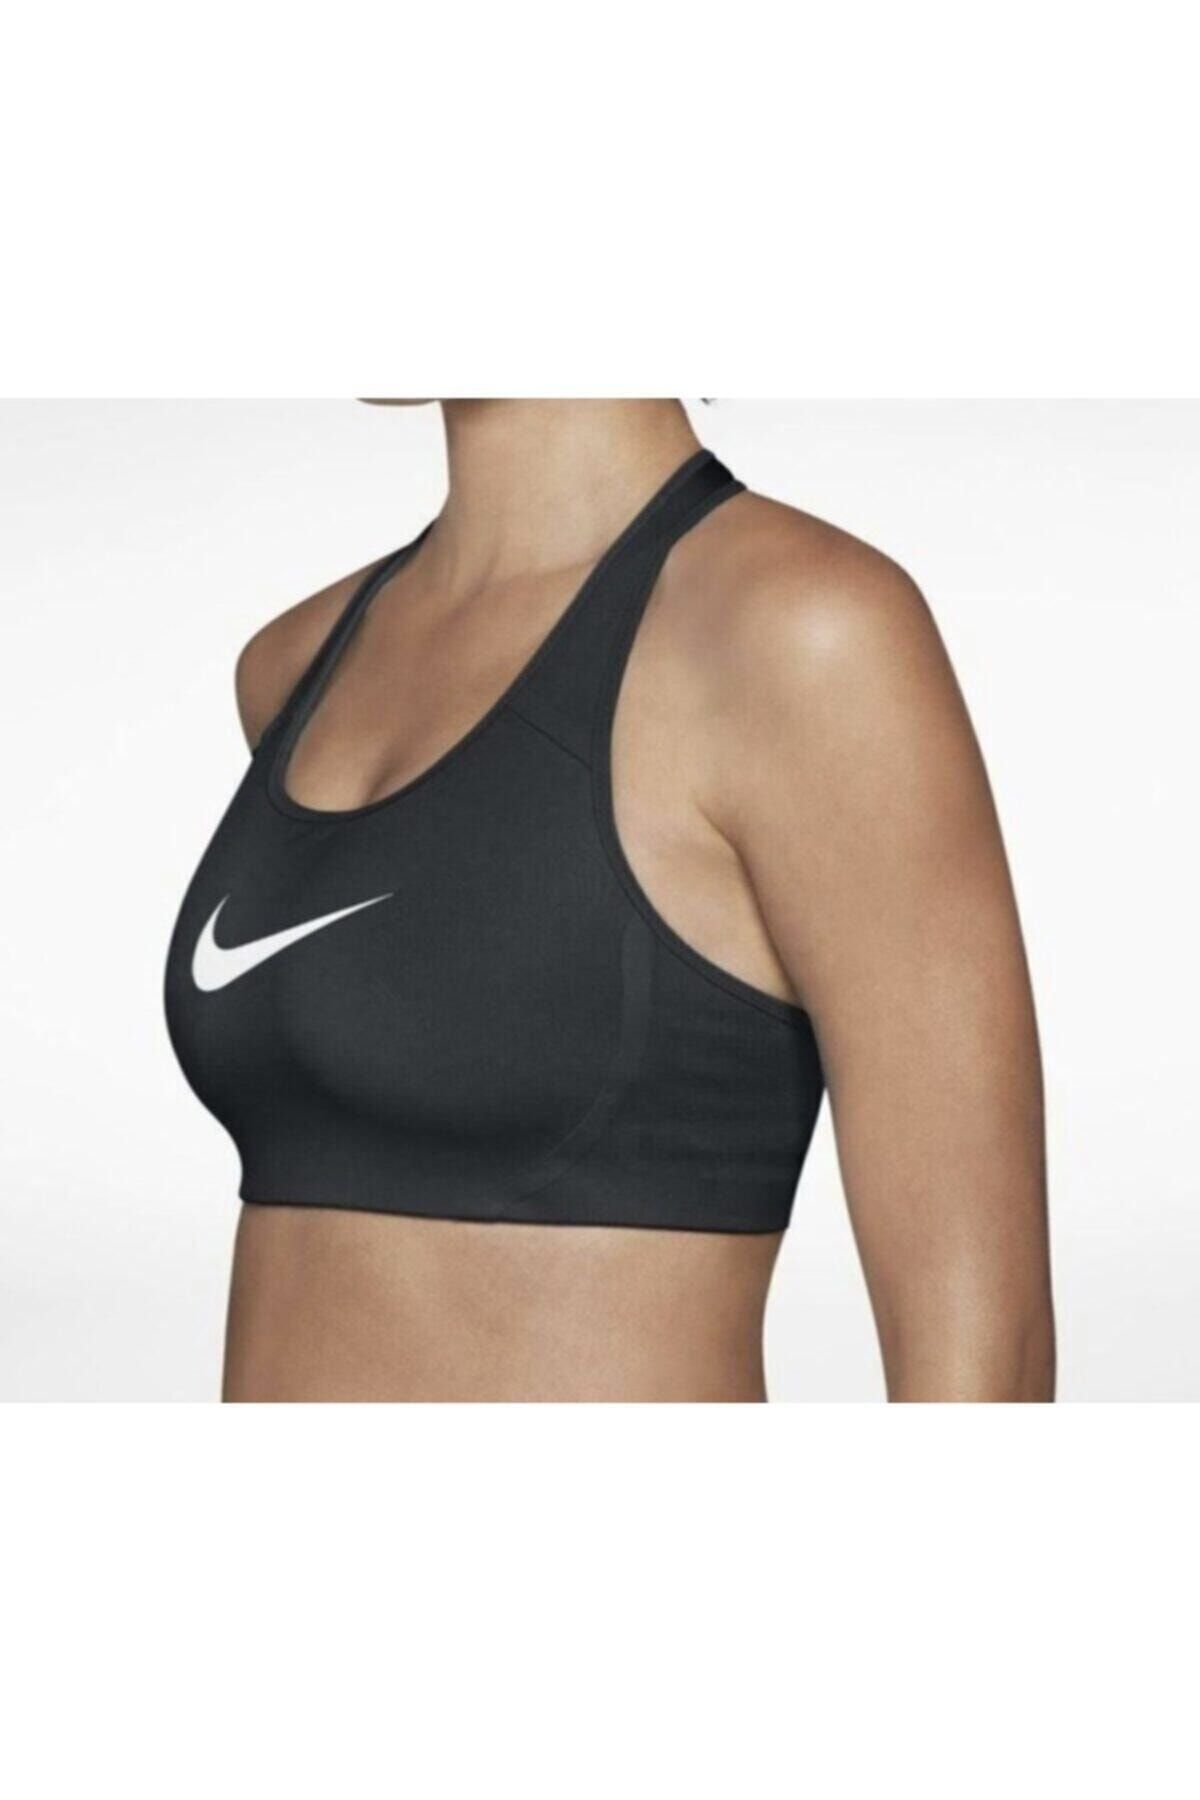 Nike Women's Victory High Support Sports Bra Black White AJ5219-010 (XS) at   Women's Clothing store